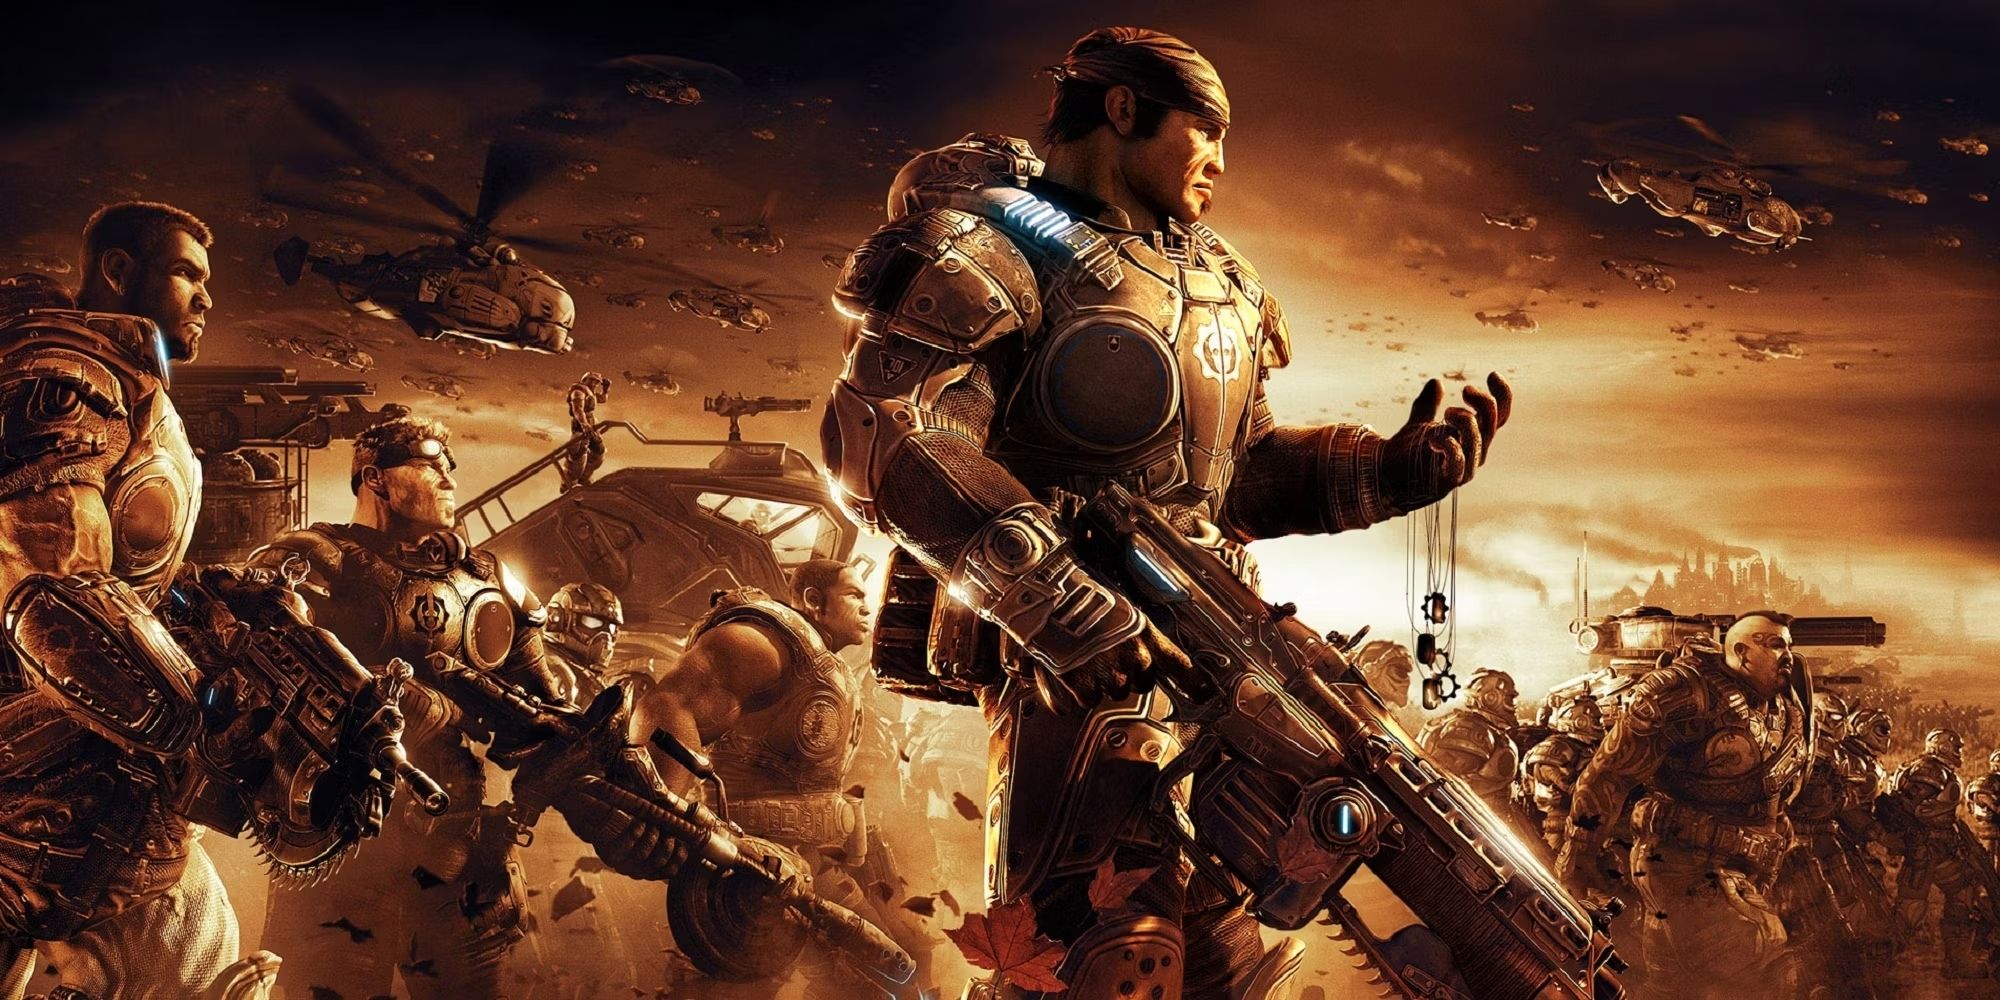 Gears of War Tabletop Game Announced